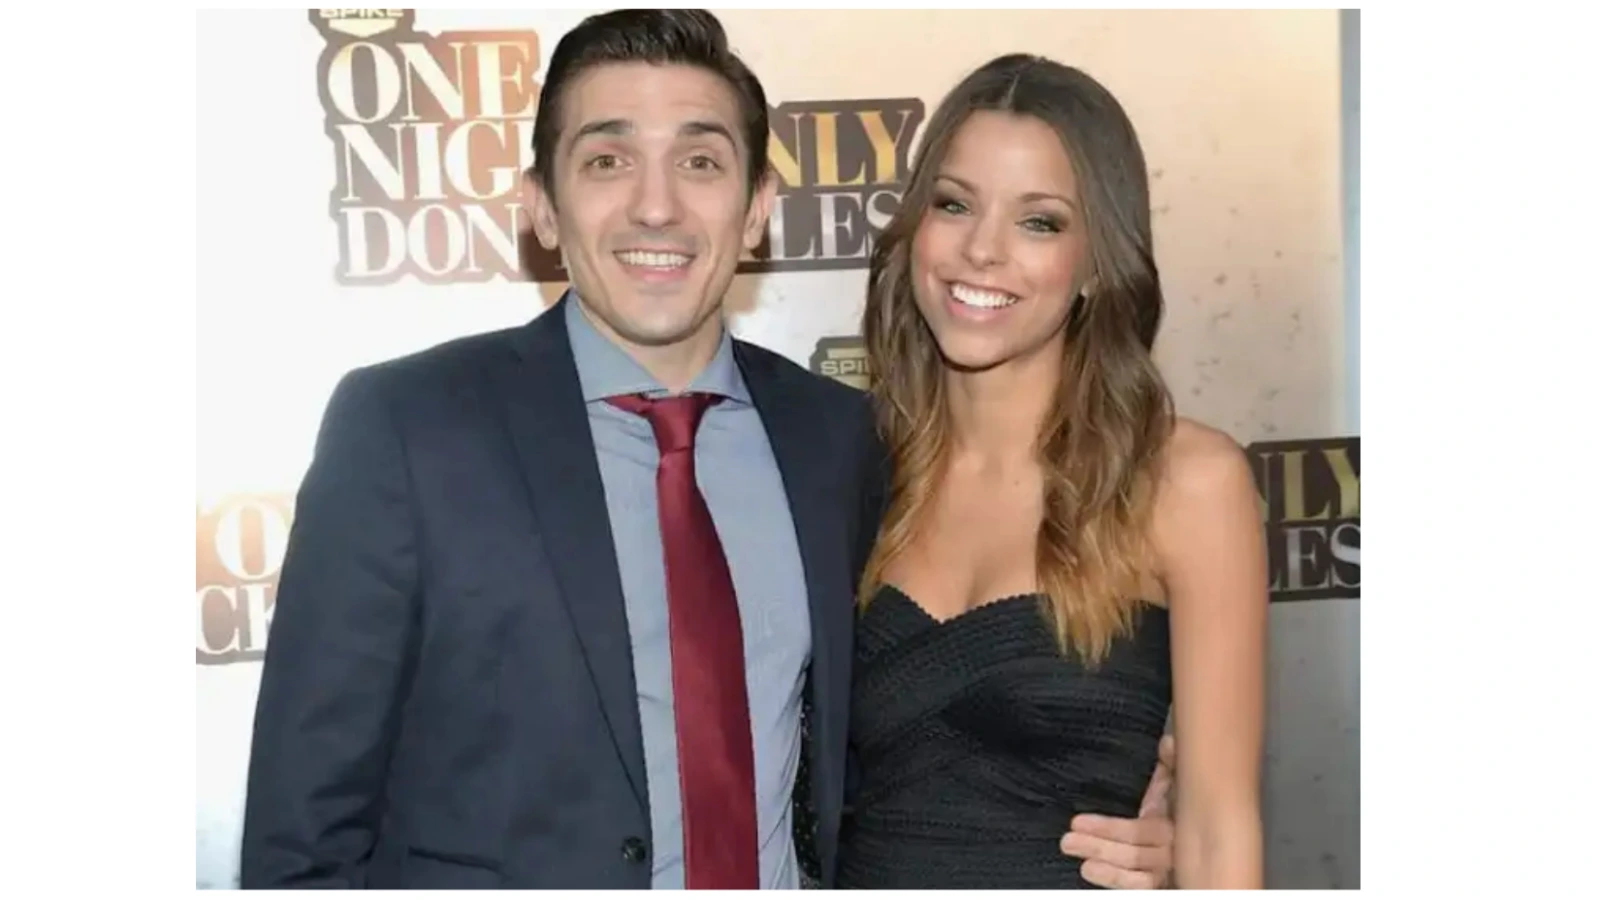 Emma Kathryn Turner (Andrew Schulz Wife) Age, Height, Wiki, Ethnicity, Net Worth, Kids, Insta and Love Story